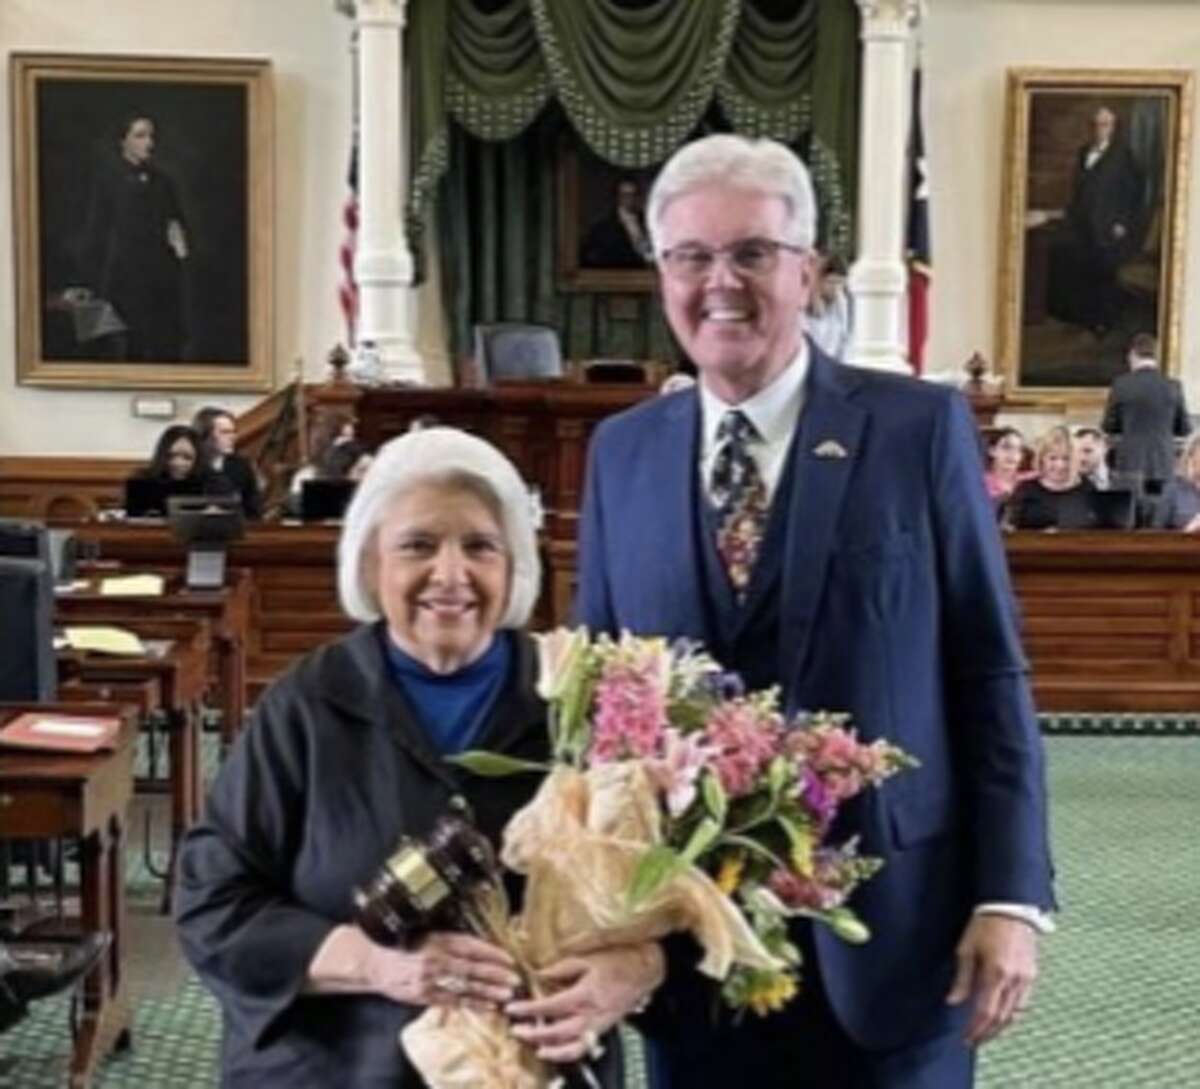 Texas State Sen. Judith Zaffitini receives a personalized gavel from Lt. Gov. Dan Patrick, commemorating her 70,000th consecutive vote in the Texas Senate. She is the second-highest ranking member and the highest ranking female and Hispanic member of the Texas Senate.